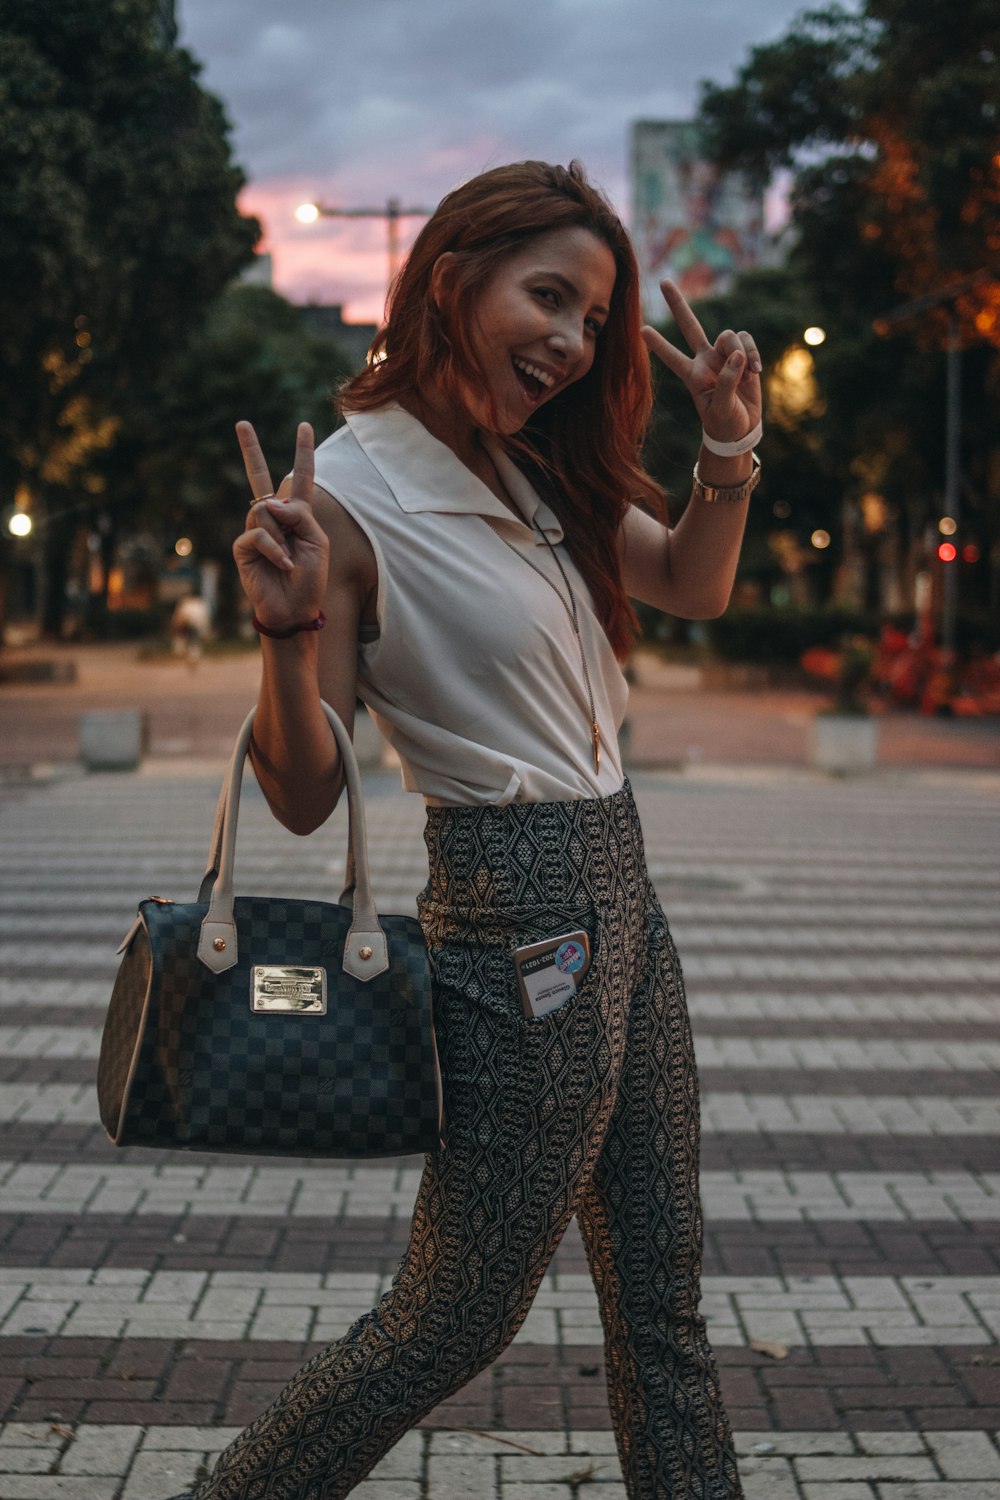 woman in white shirt and black and white skirt holding black leather handbag